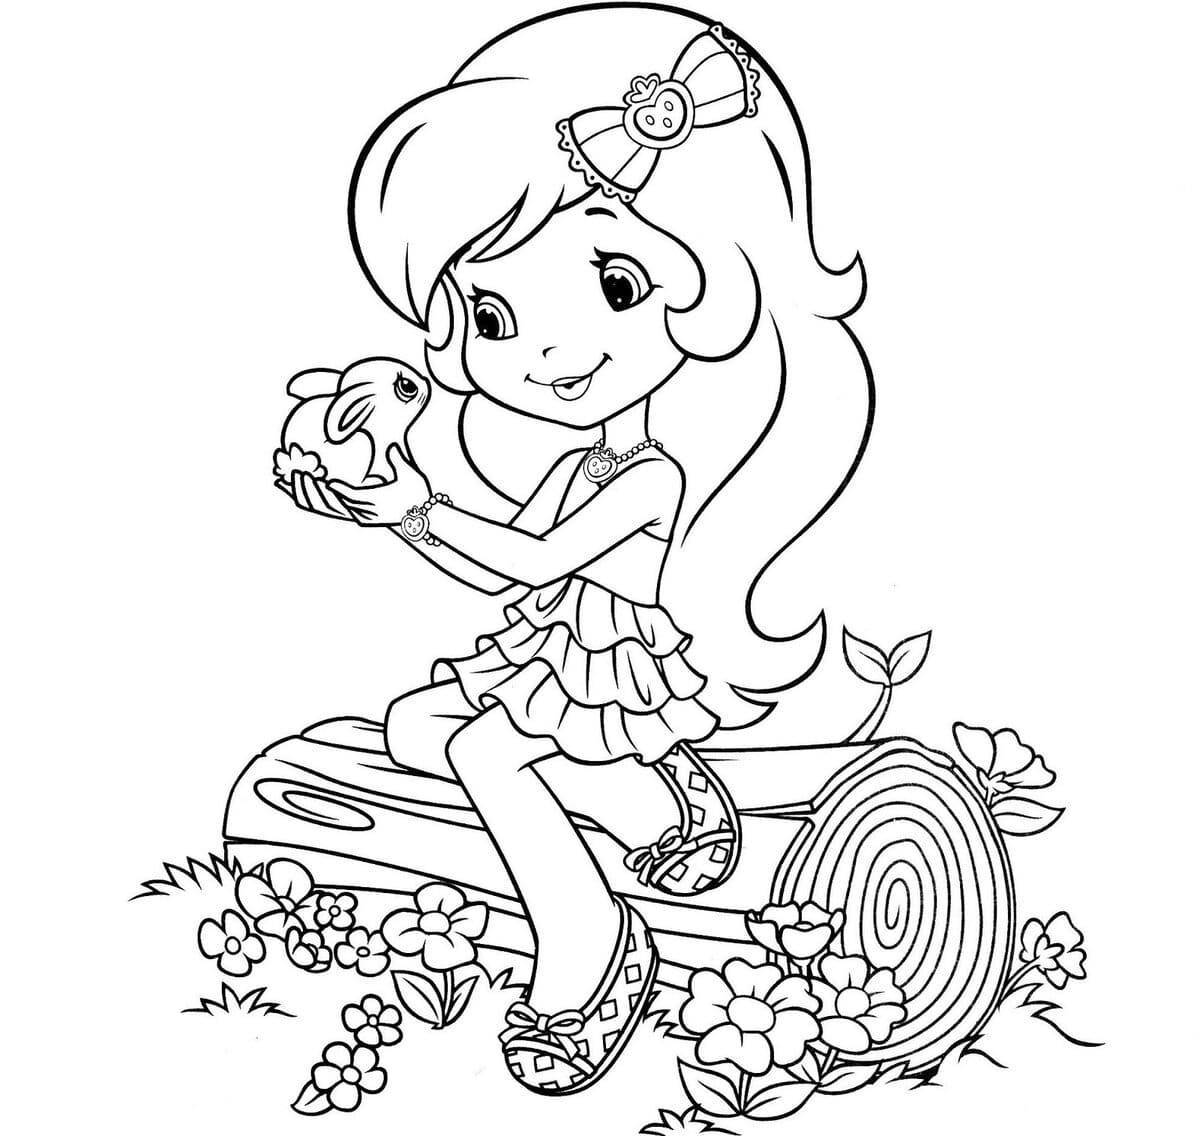 Incredible coloring book for girls